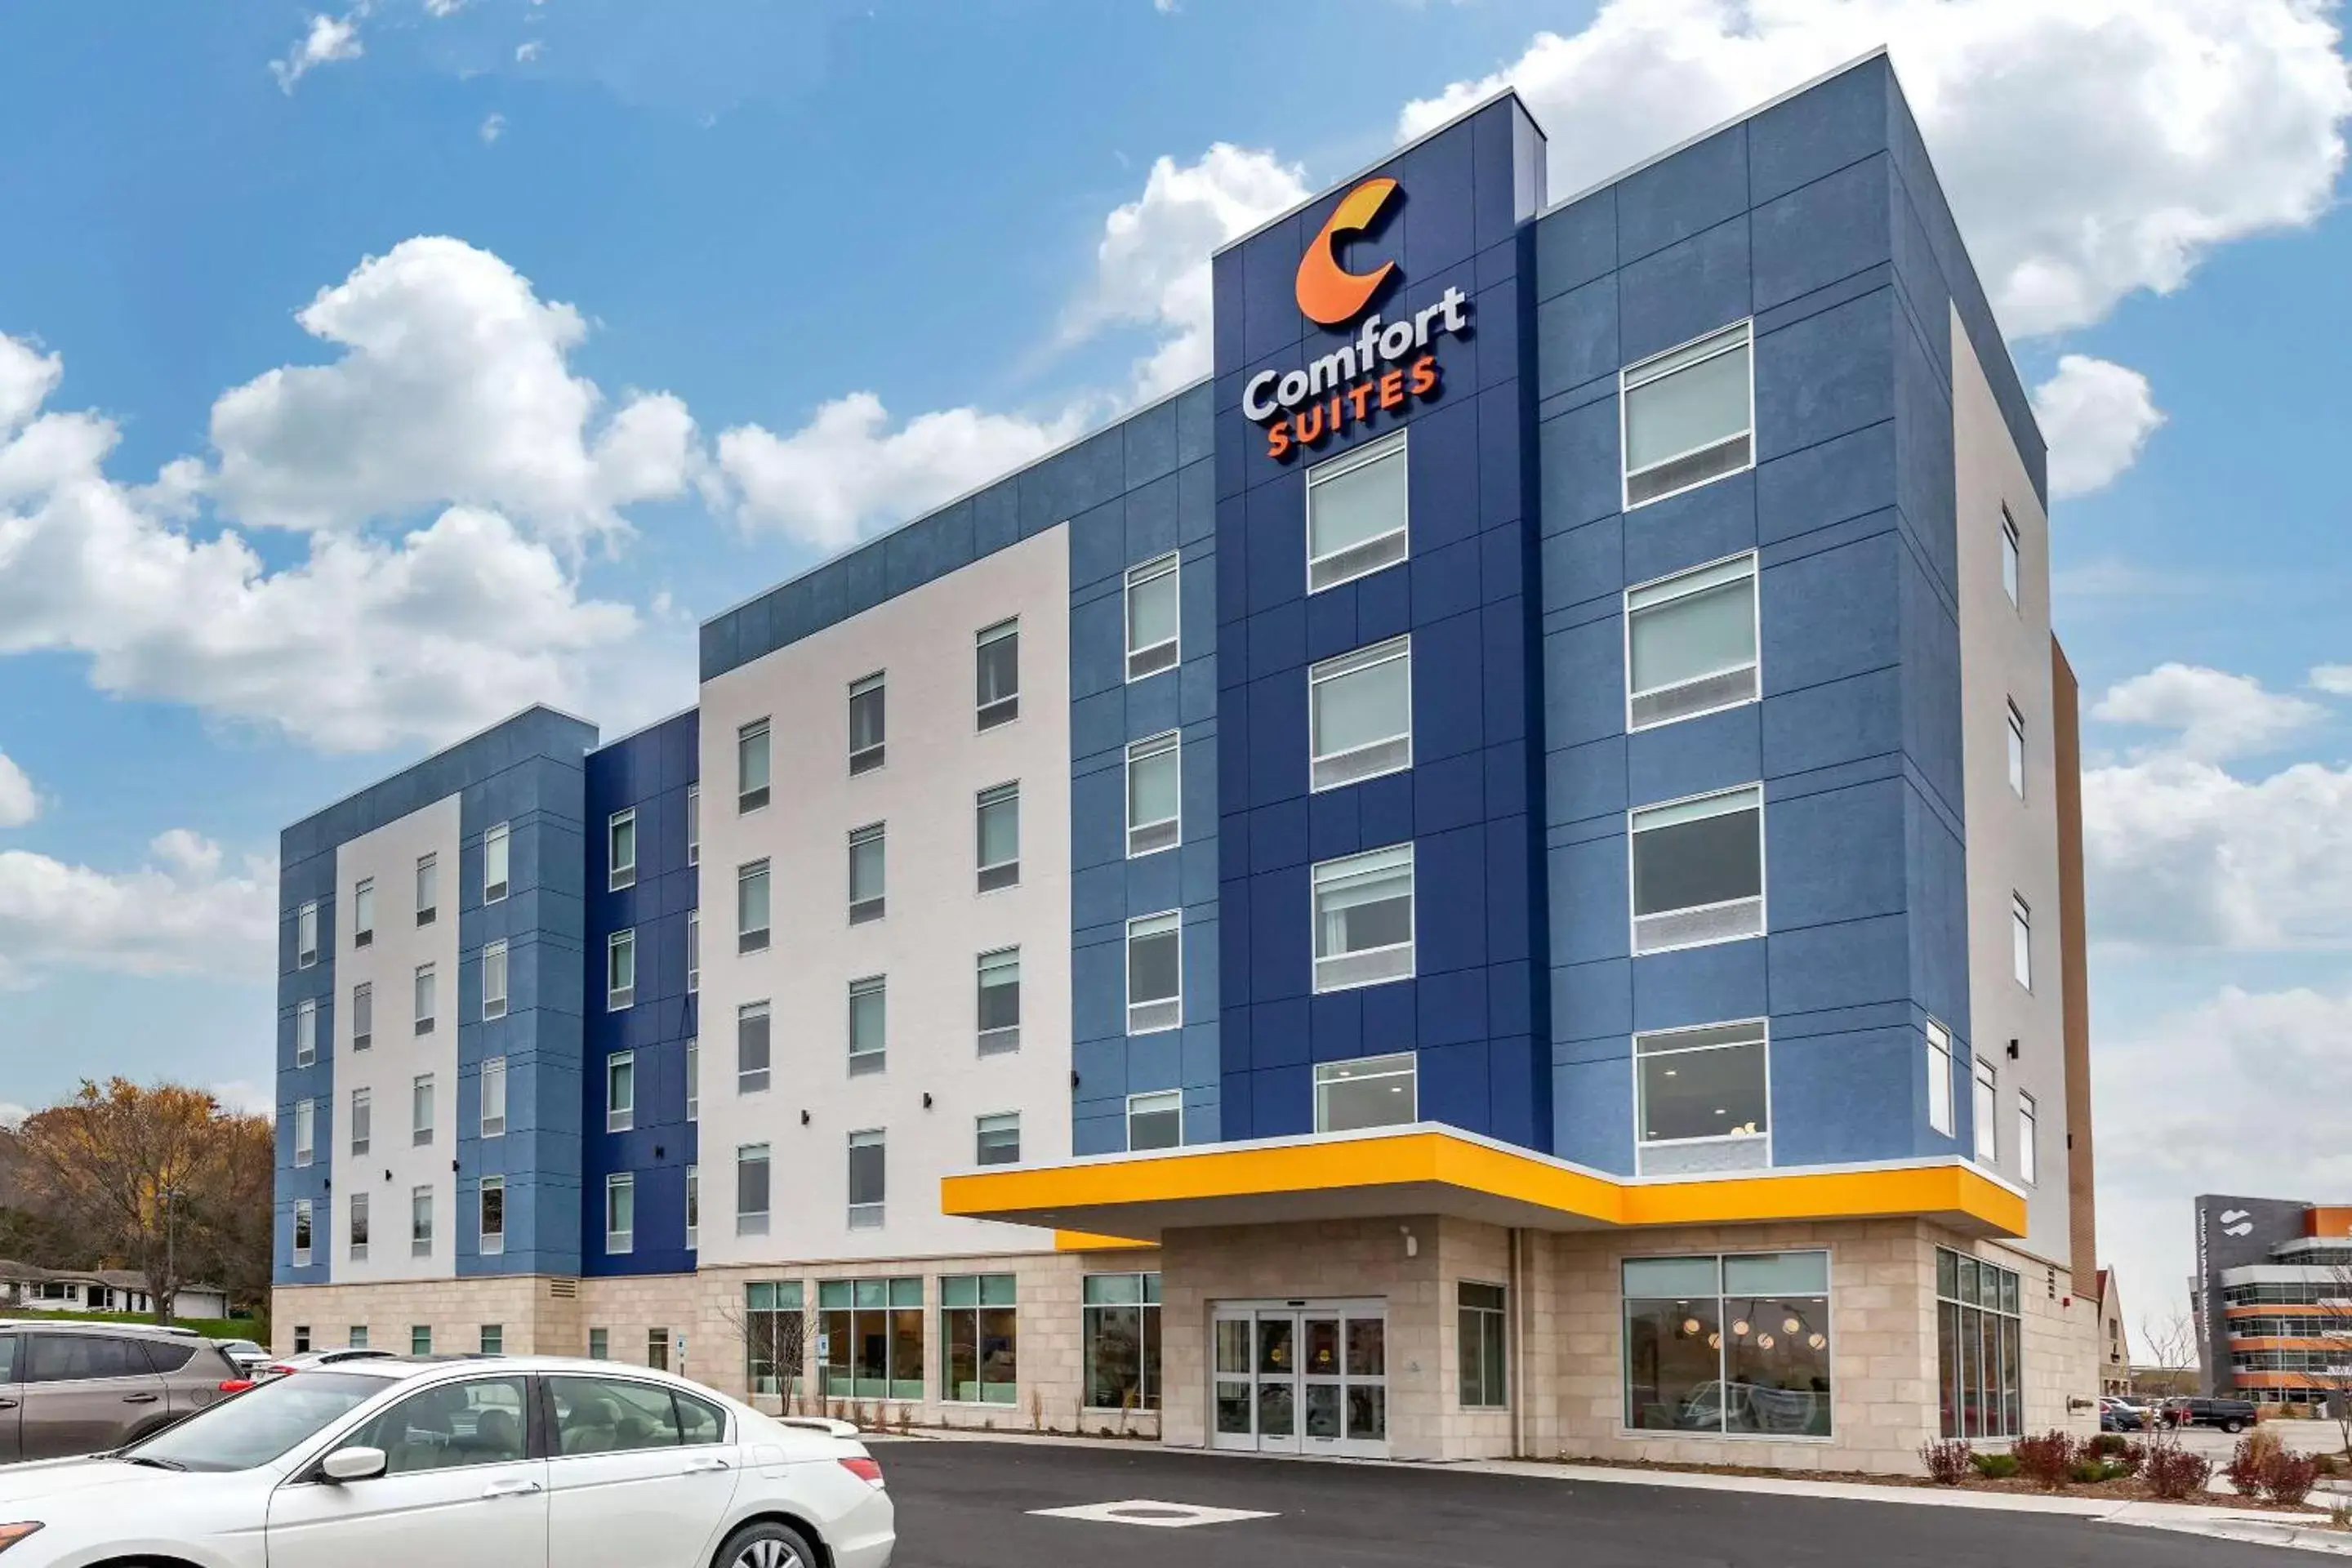 Property Building in Comfort Suites Cottage Grove - Madison